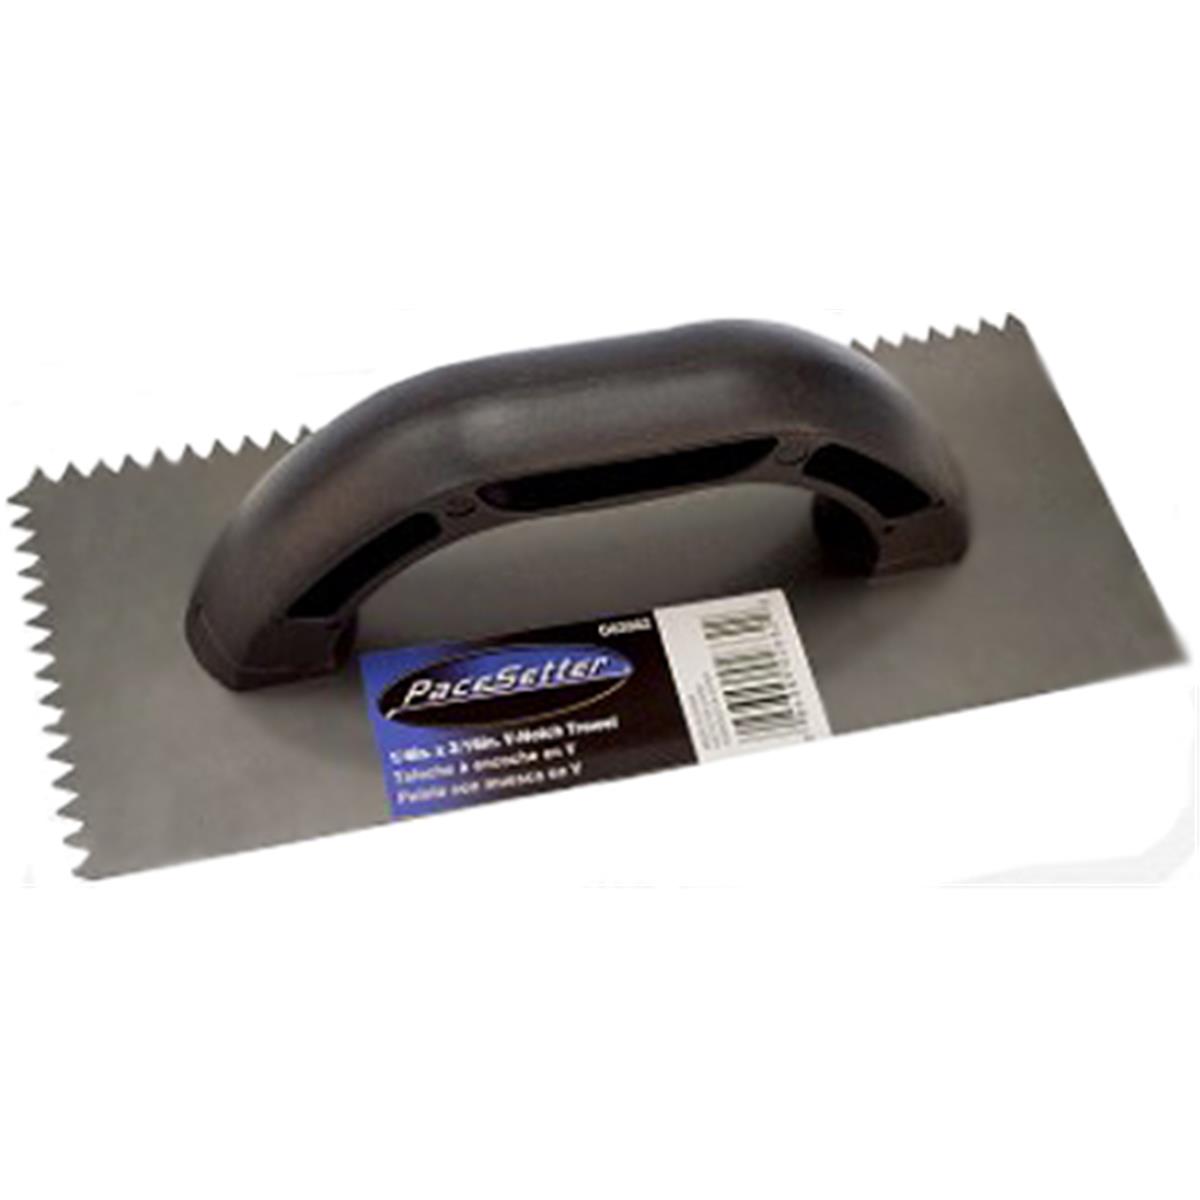 G02662 0.25 X 0.18 In. V Plastic Handle